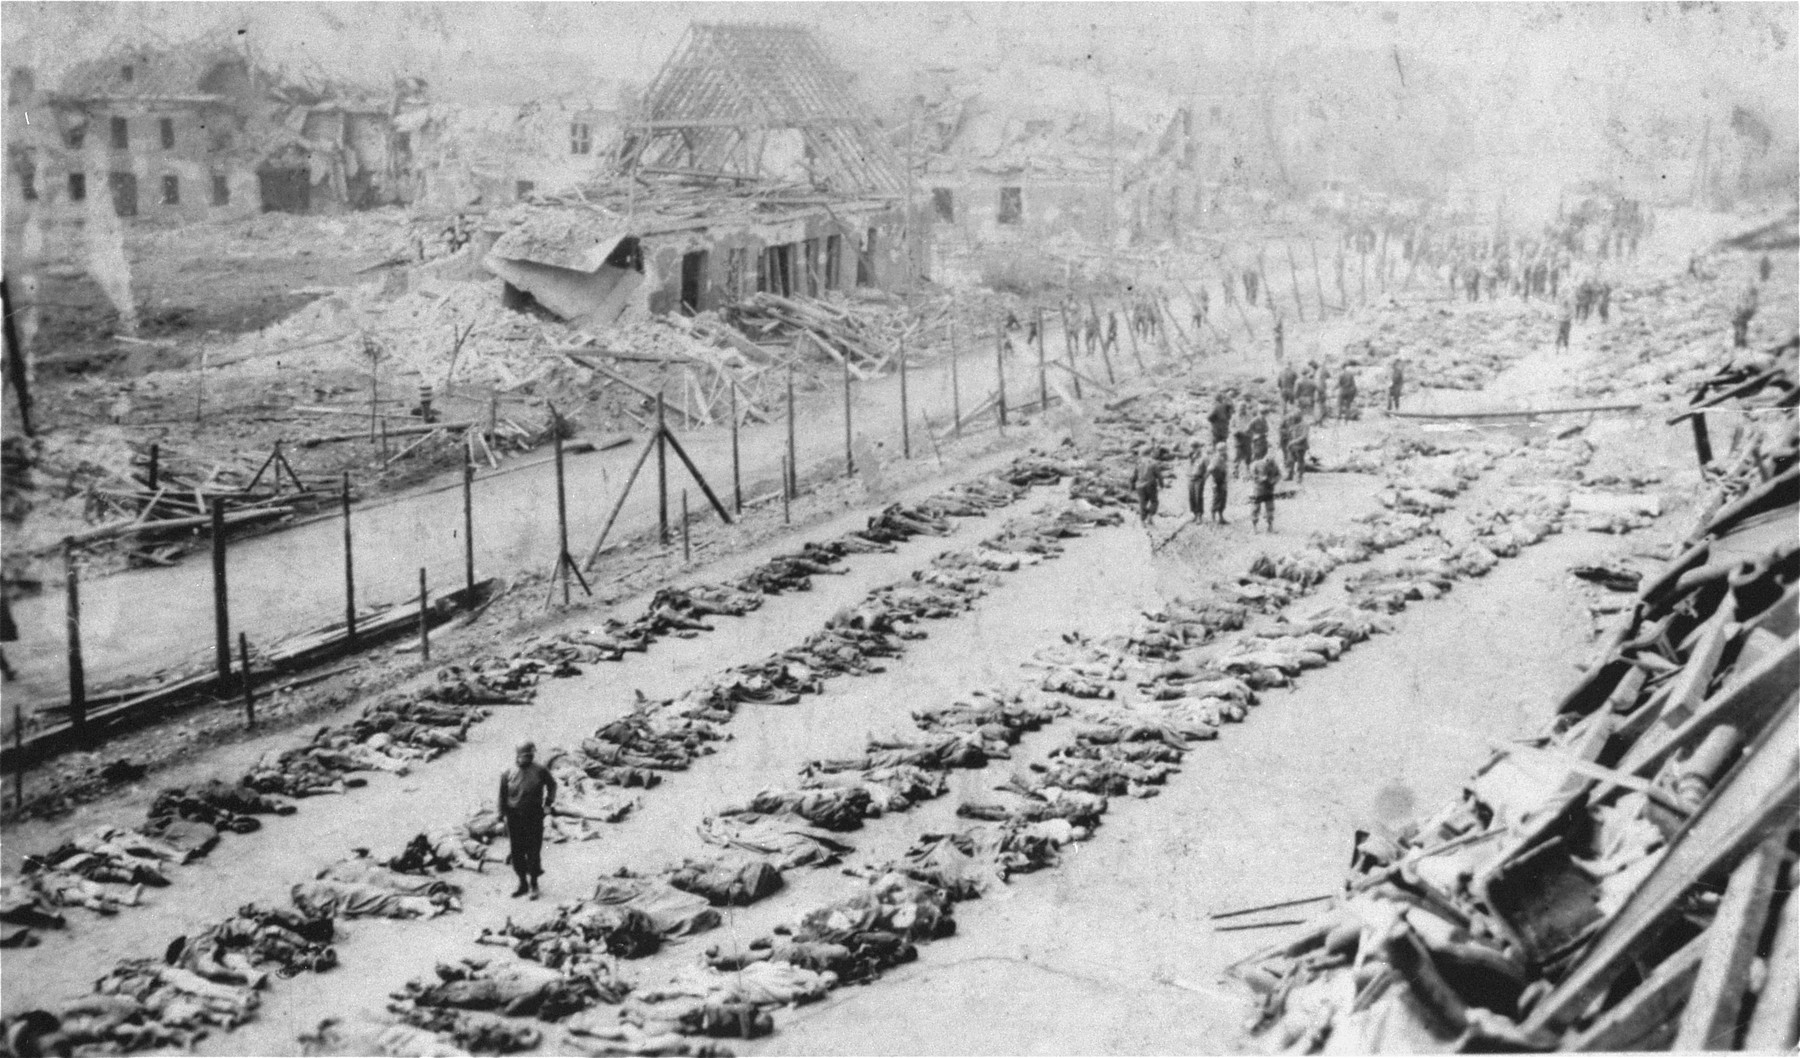 American soldiers walk among rows of corpses in the Nordhausen concentration camp.